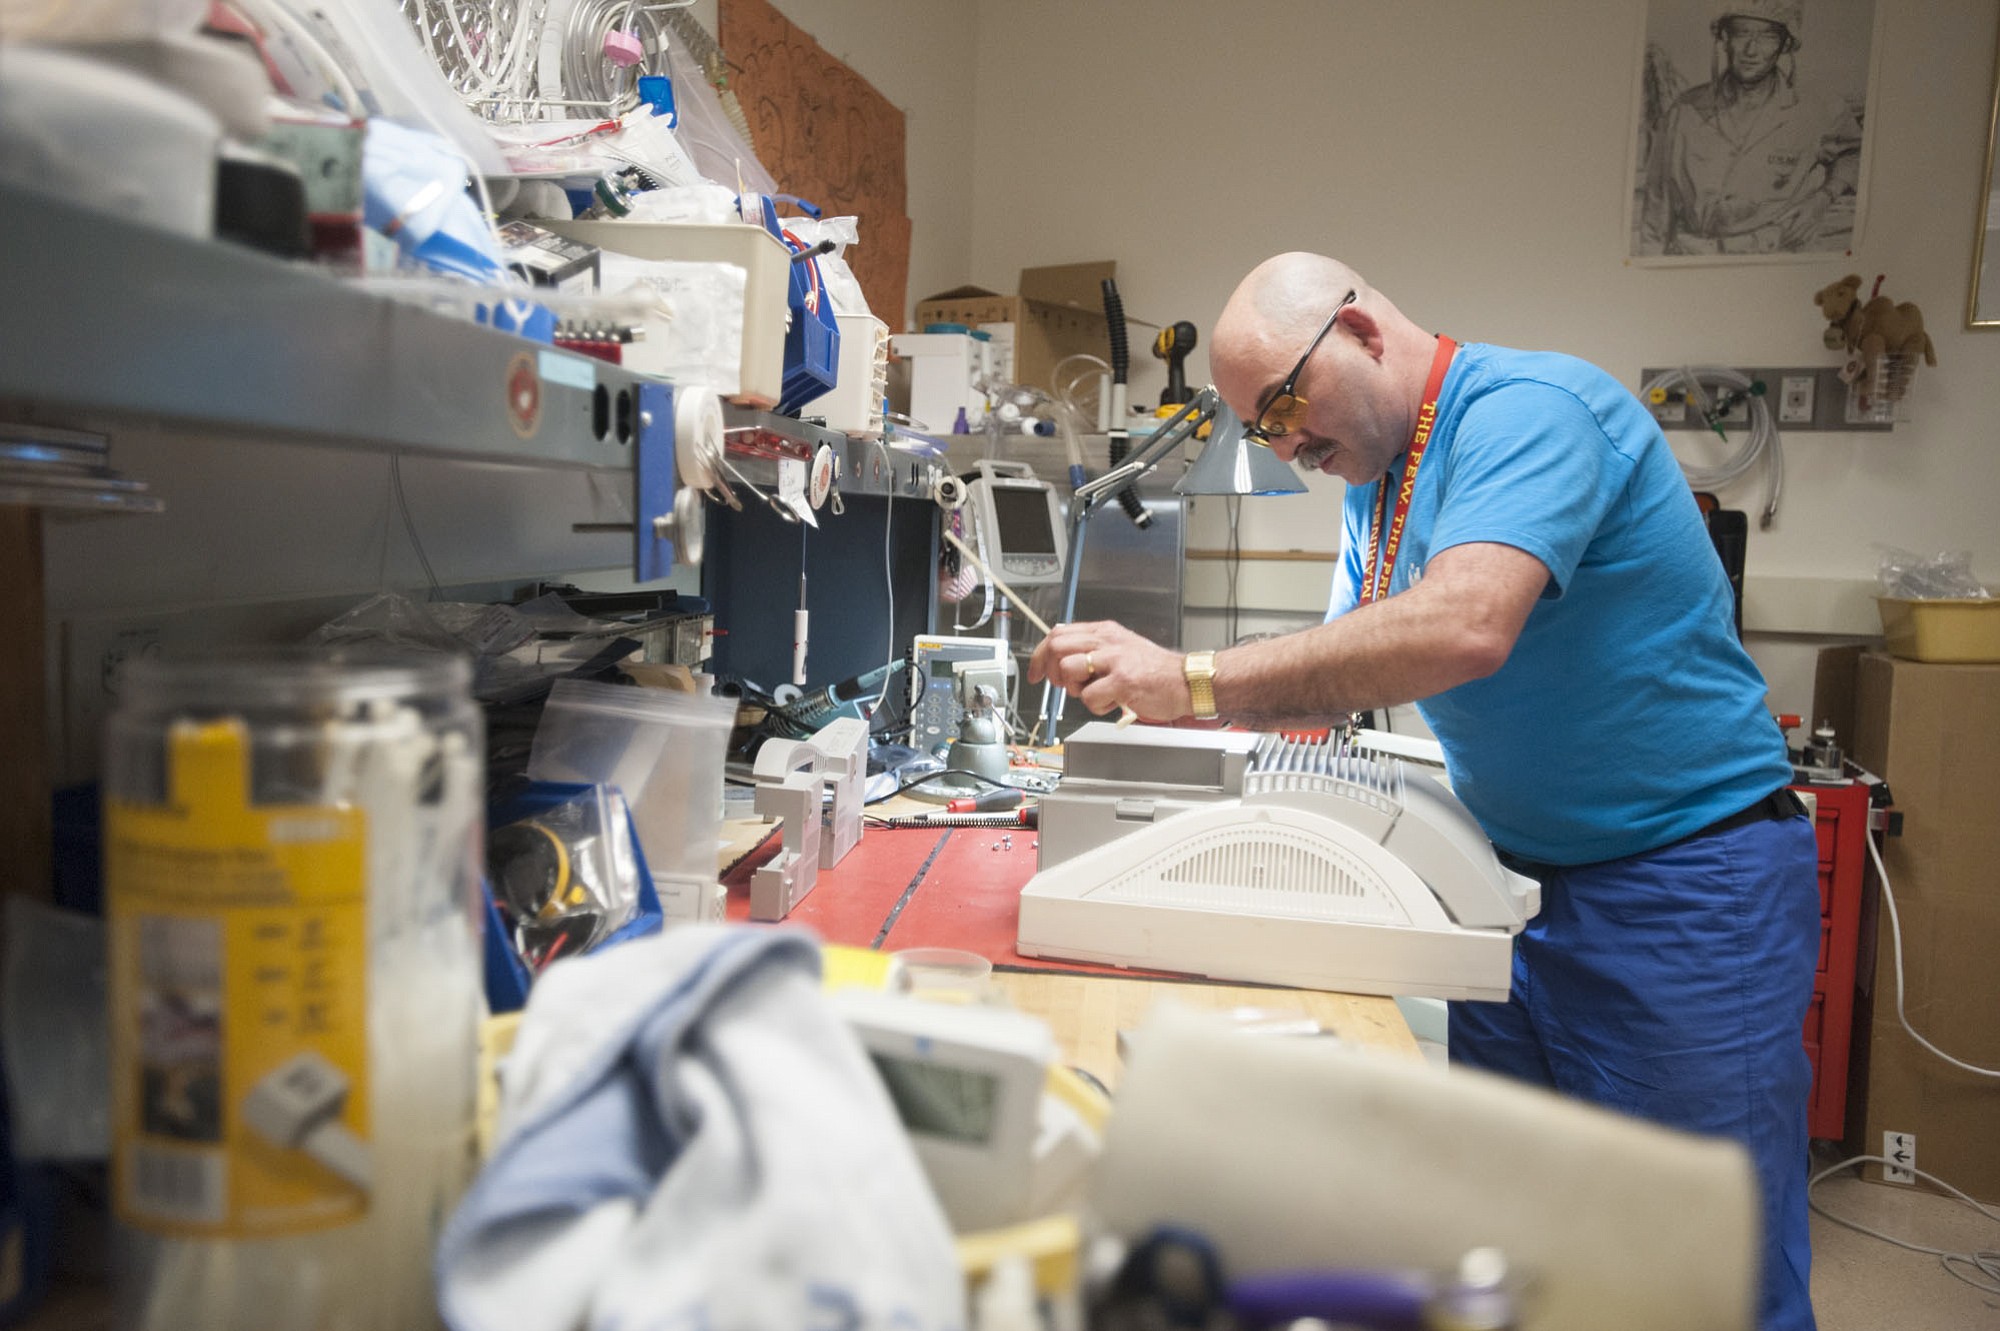 George Pobi, lead clinical engineering technician, works on a monitor Tuesday afternoon in his shop in the basement at Legacy Salmon Creek Medical Center.